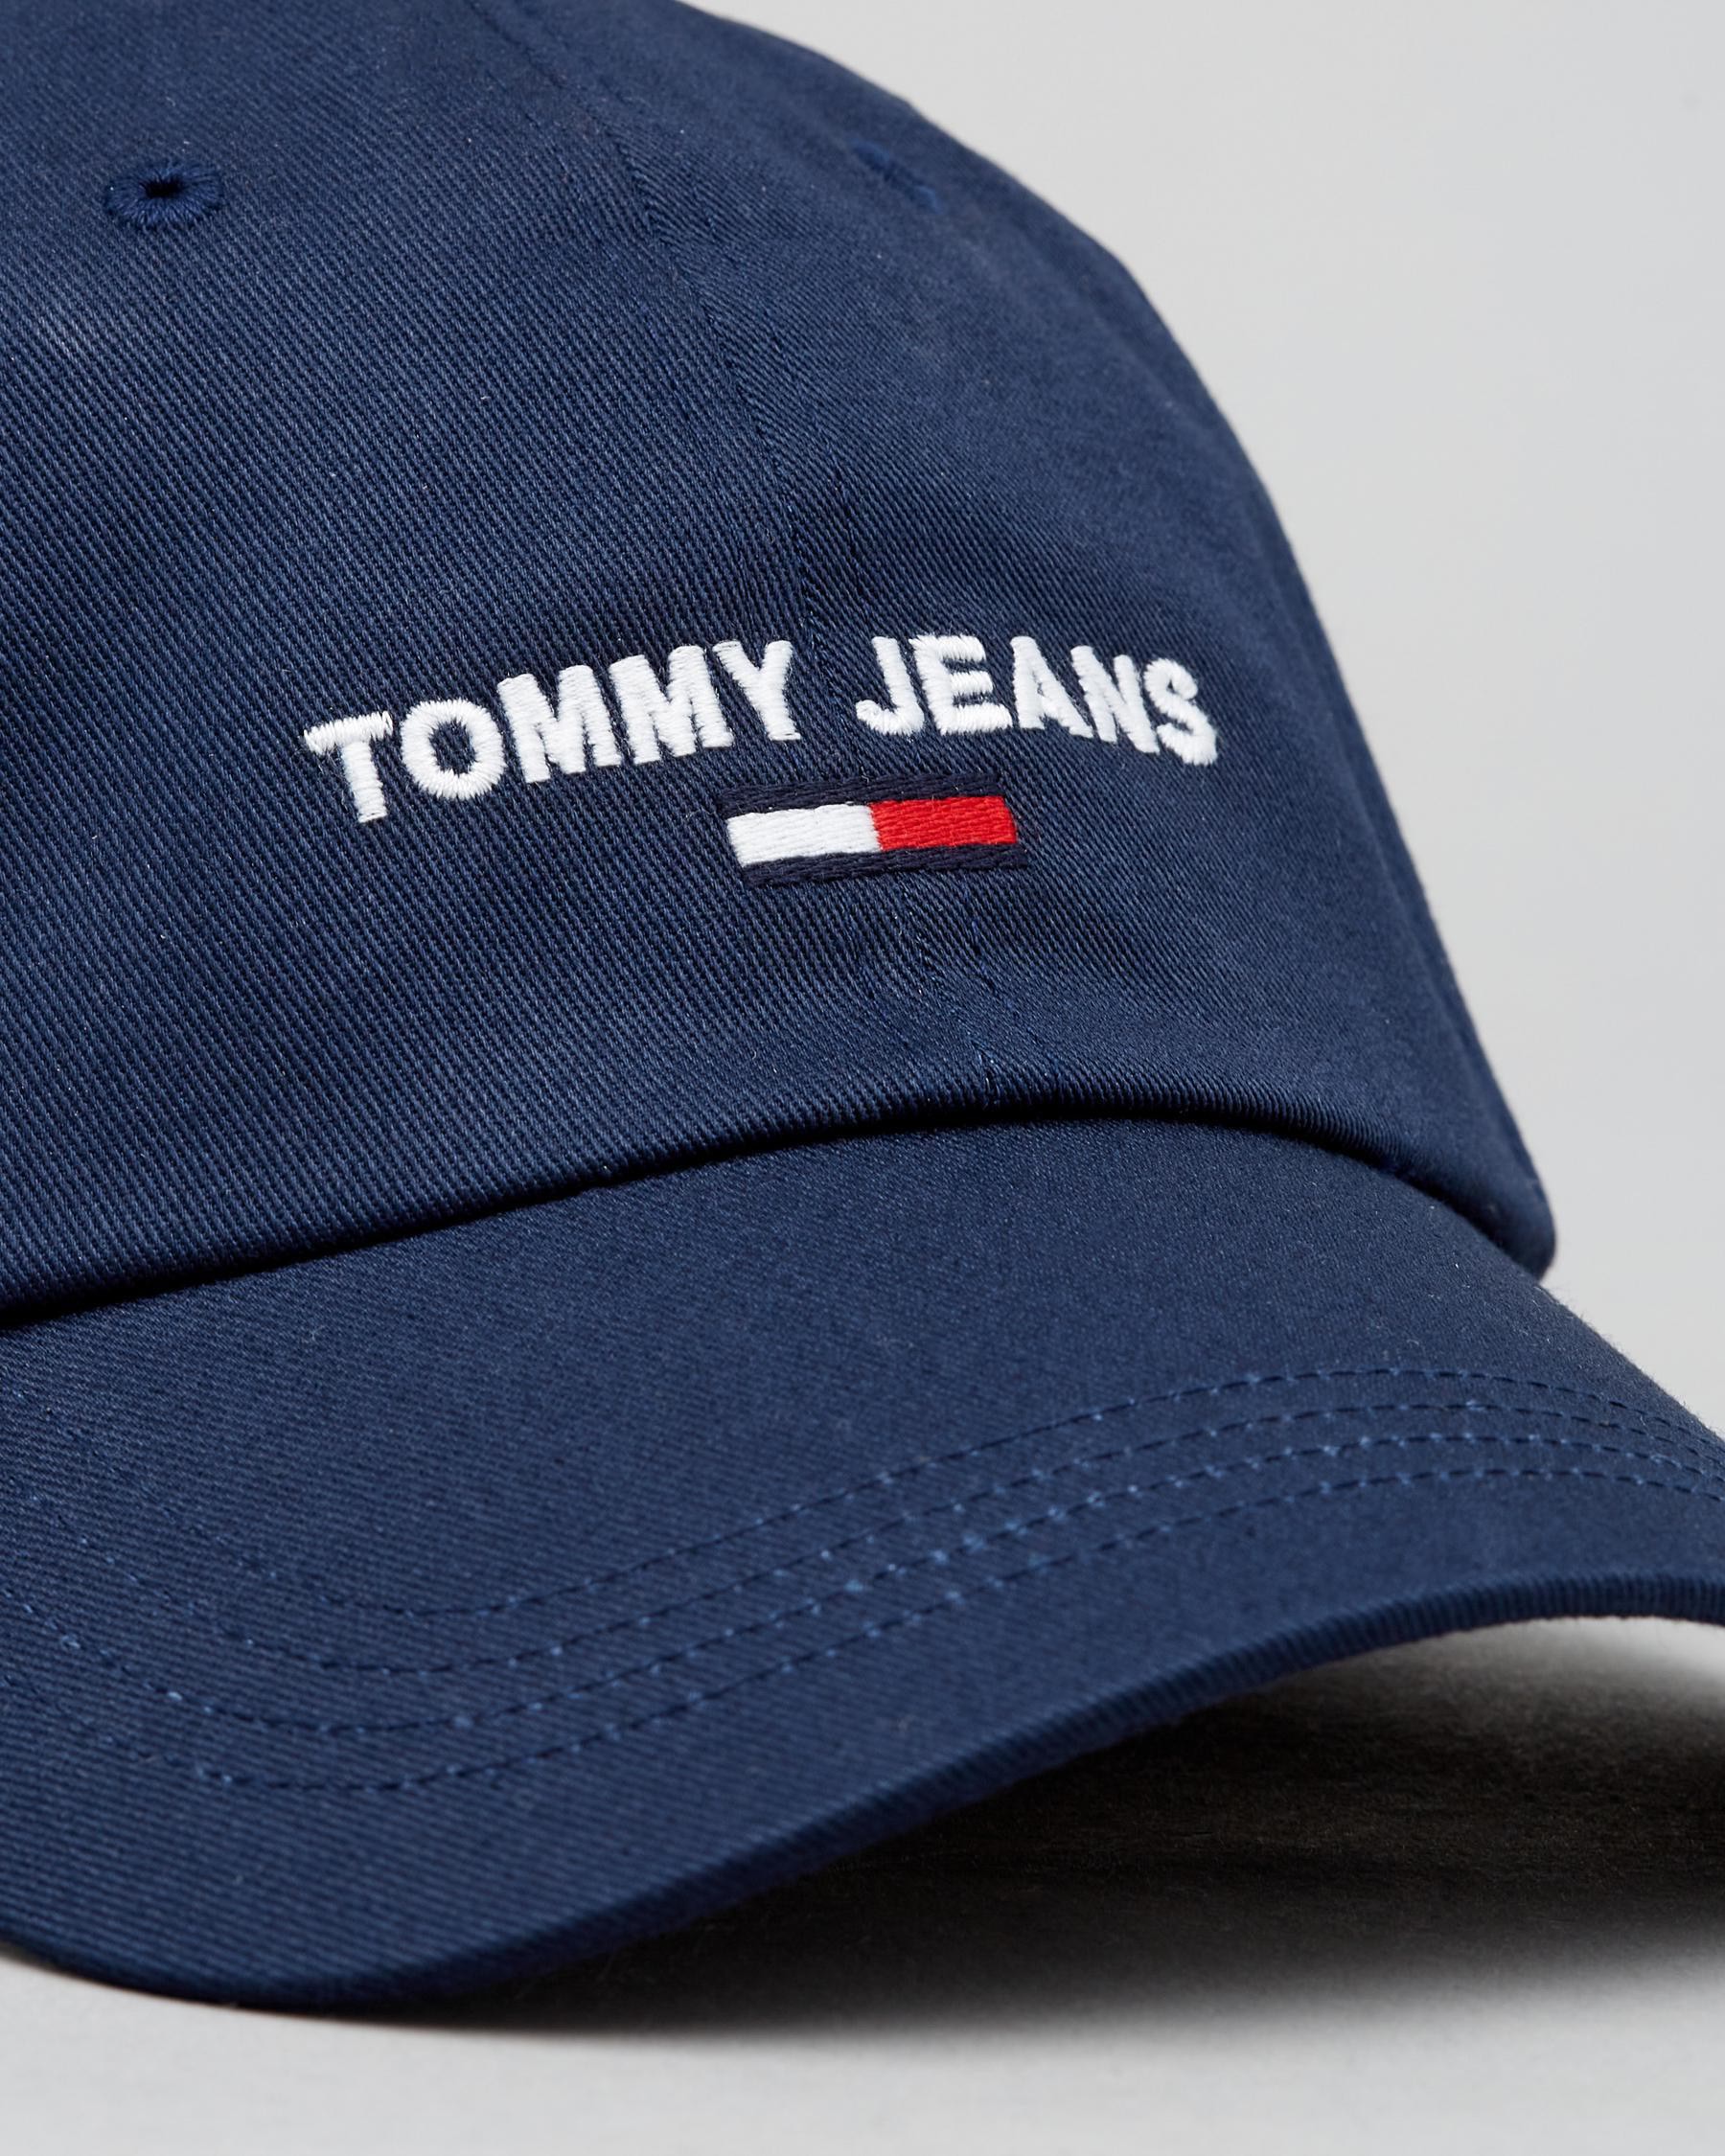 Navy Cap Shipping Twilight Sport Hilfiger - States In Easy Returns - United & Tommy Beach FREE* City